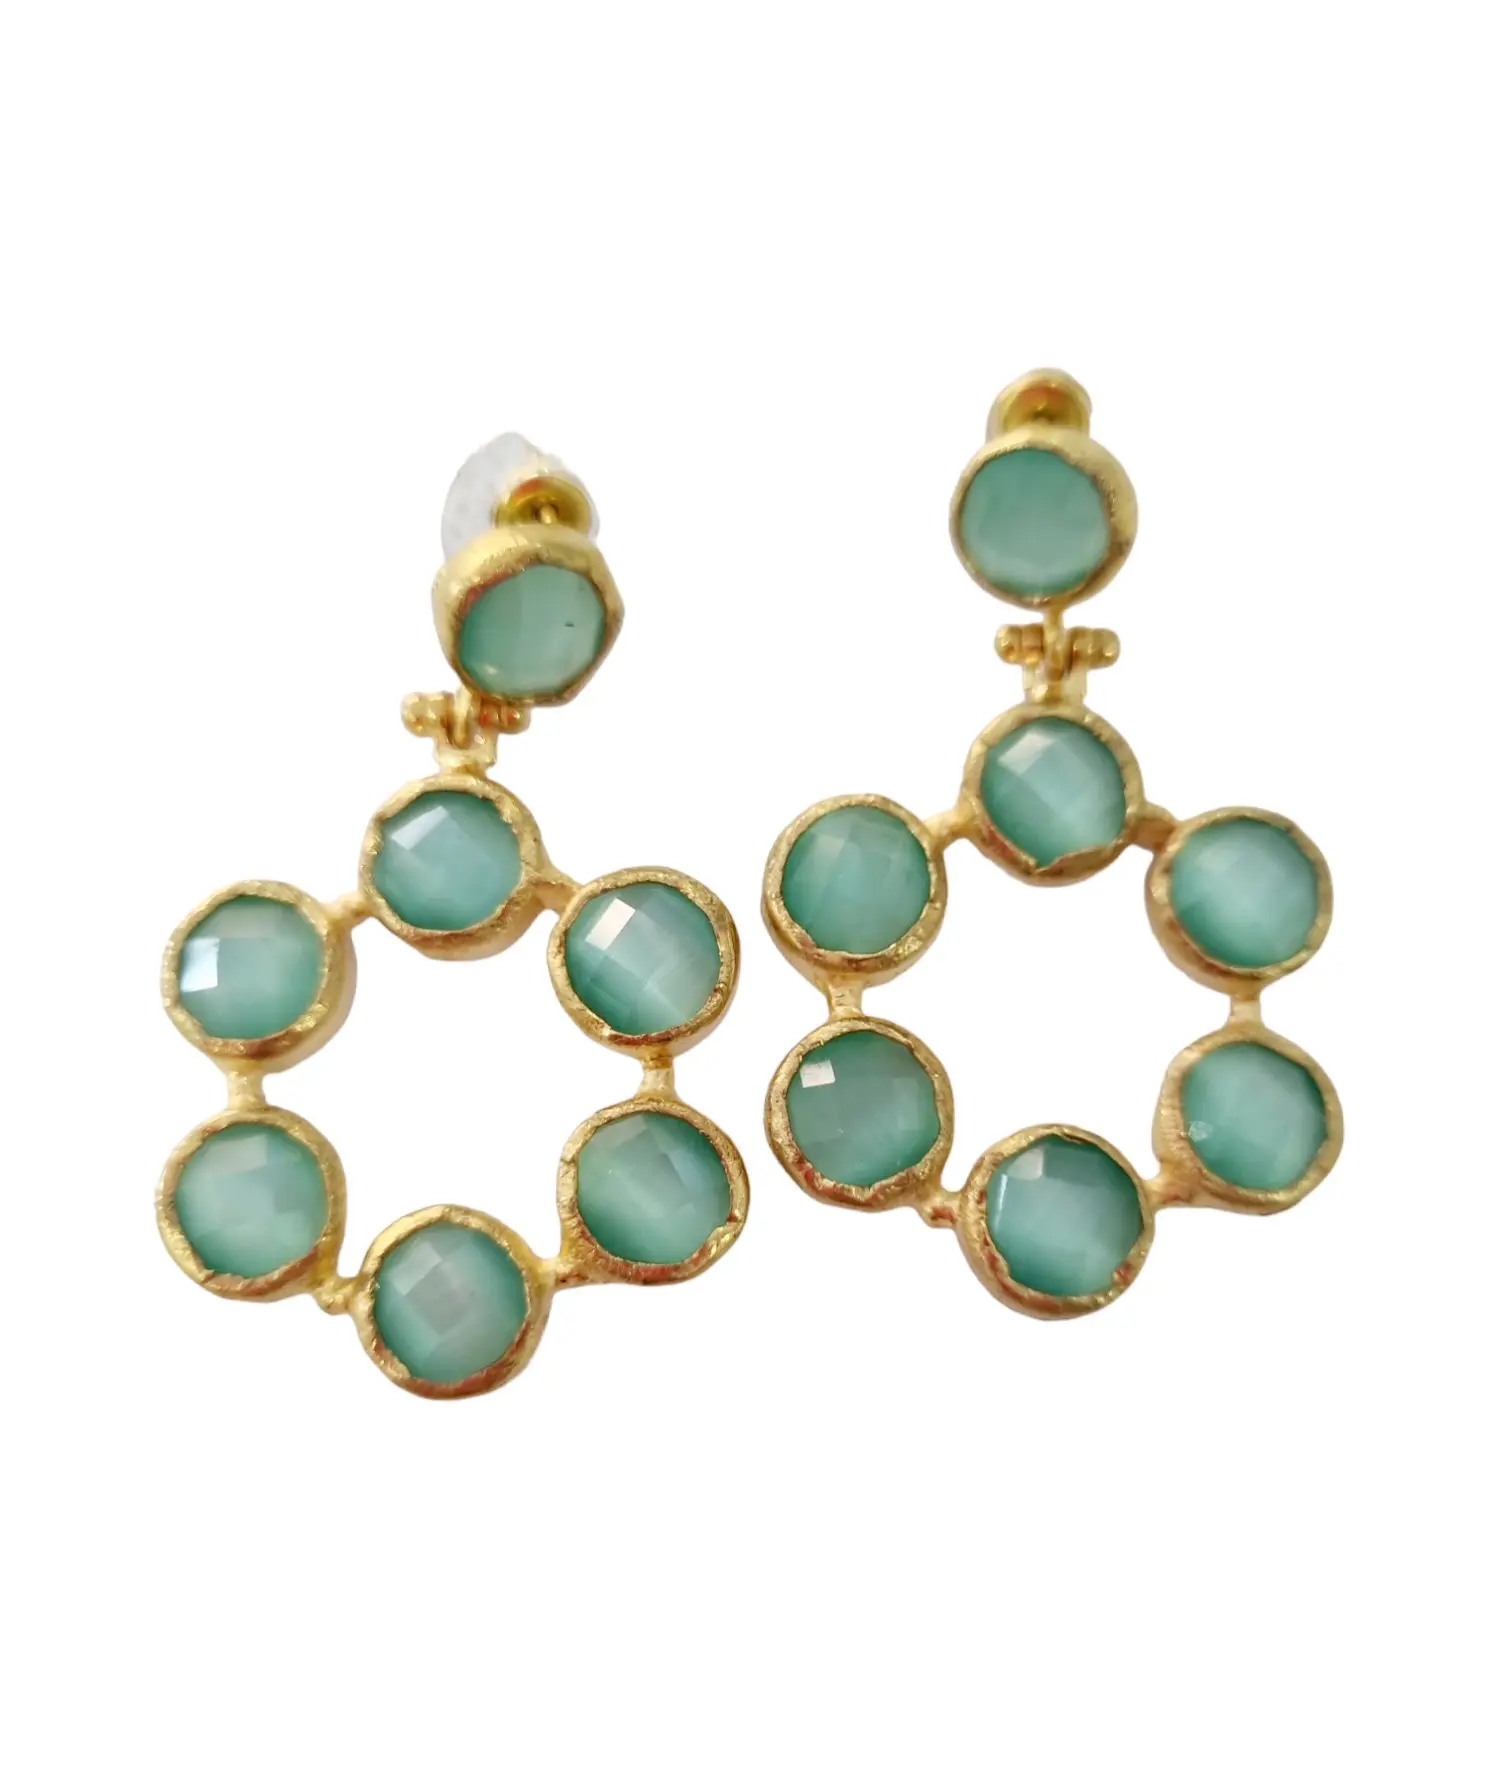 Earrings made with cat's eye surrounded by brass. Aqua green color Length 4.5cm Weight 7.3gr